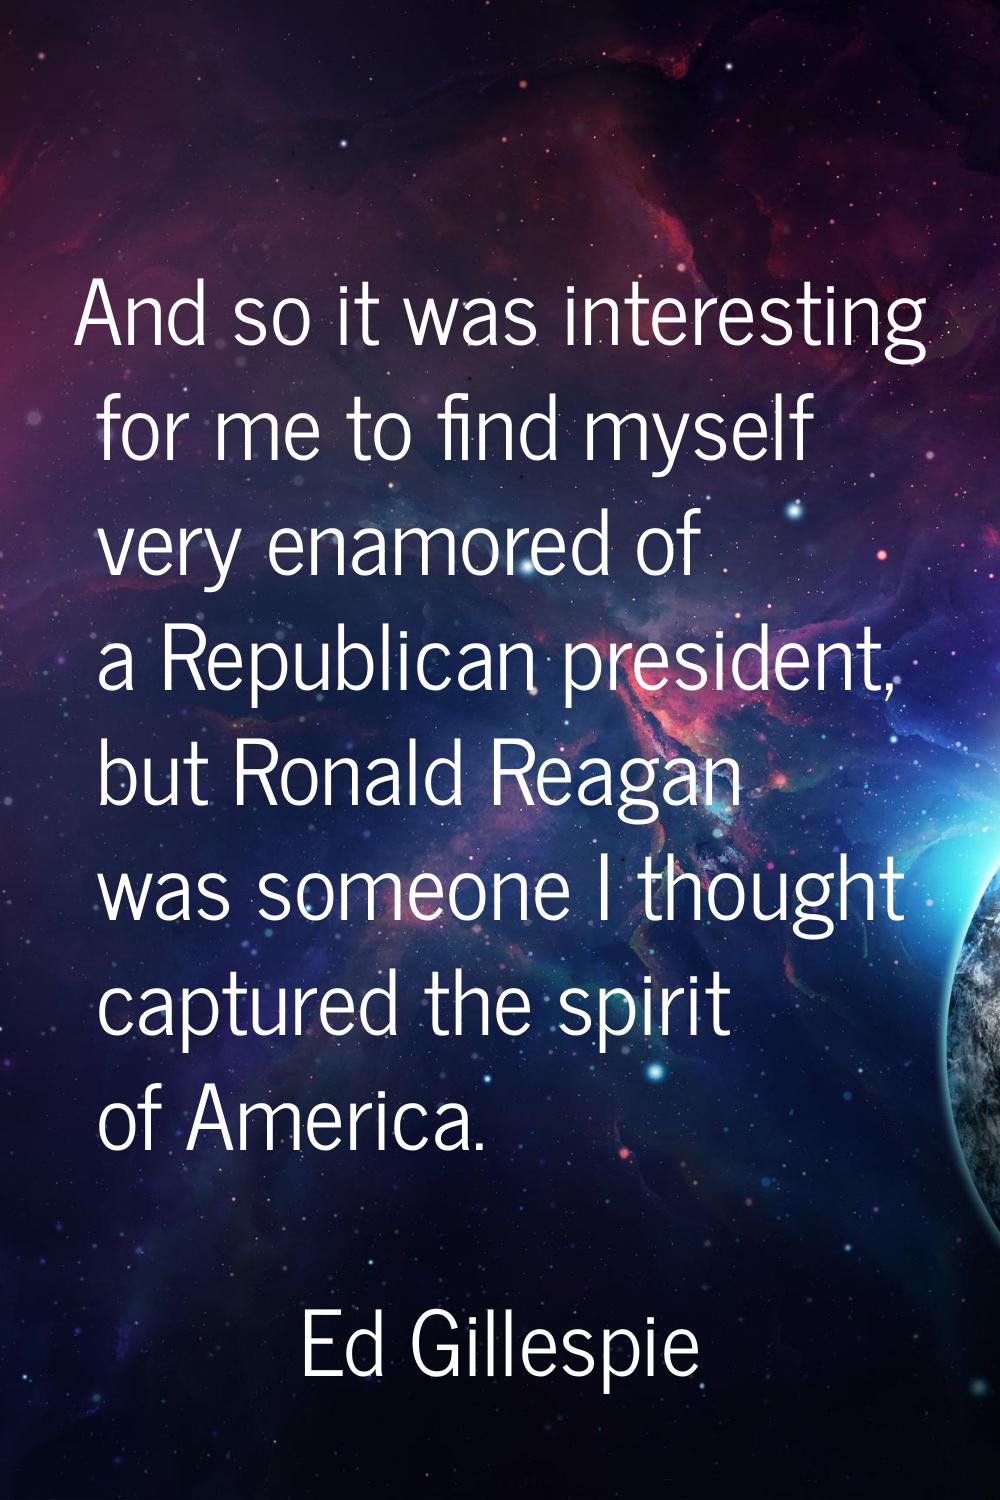 And so it was interesting for me to find myself very enamored of a Republican president, but Ronald